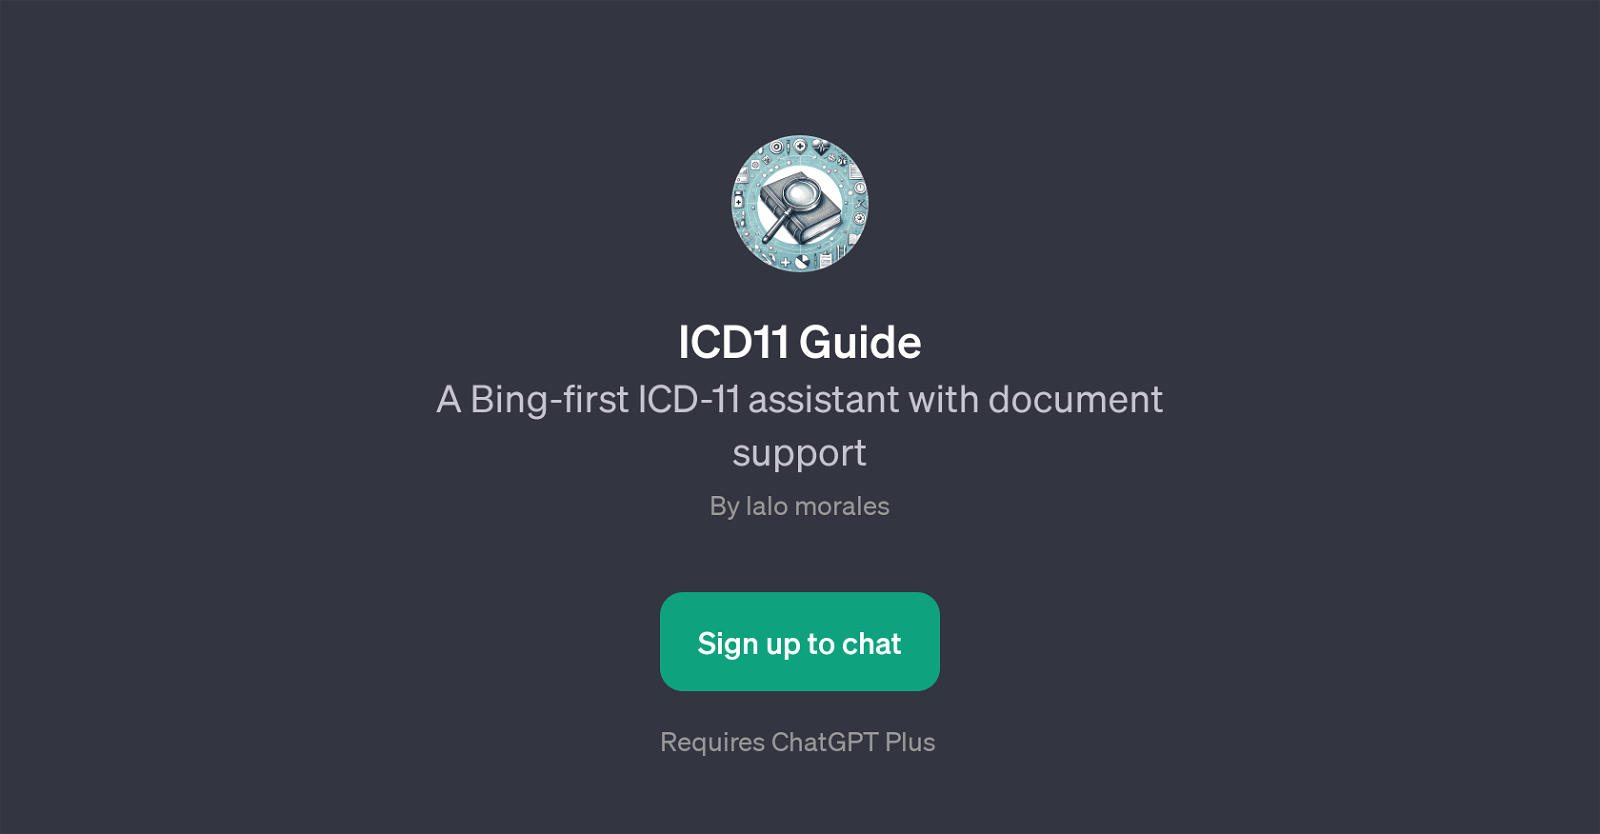 ICD11 Guide website